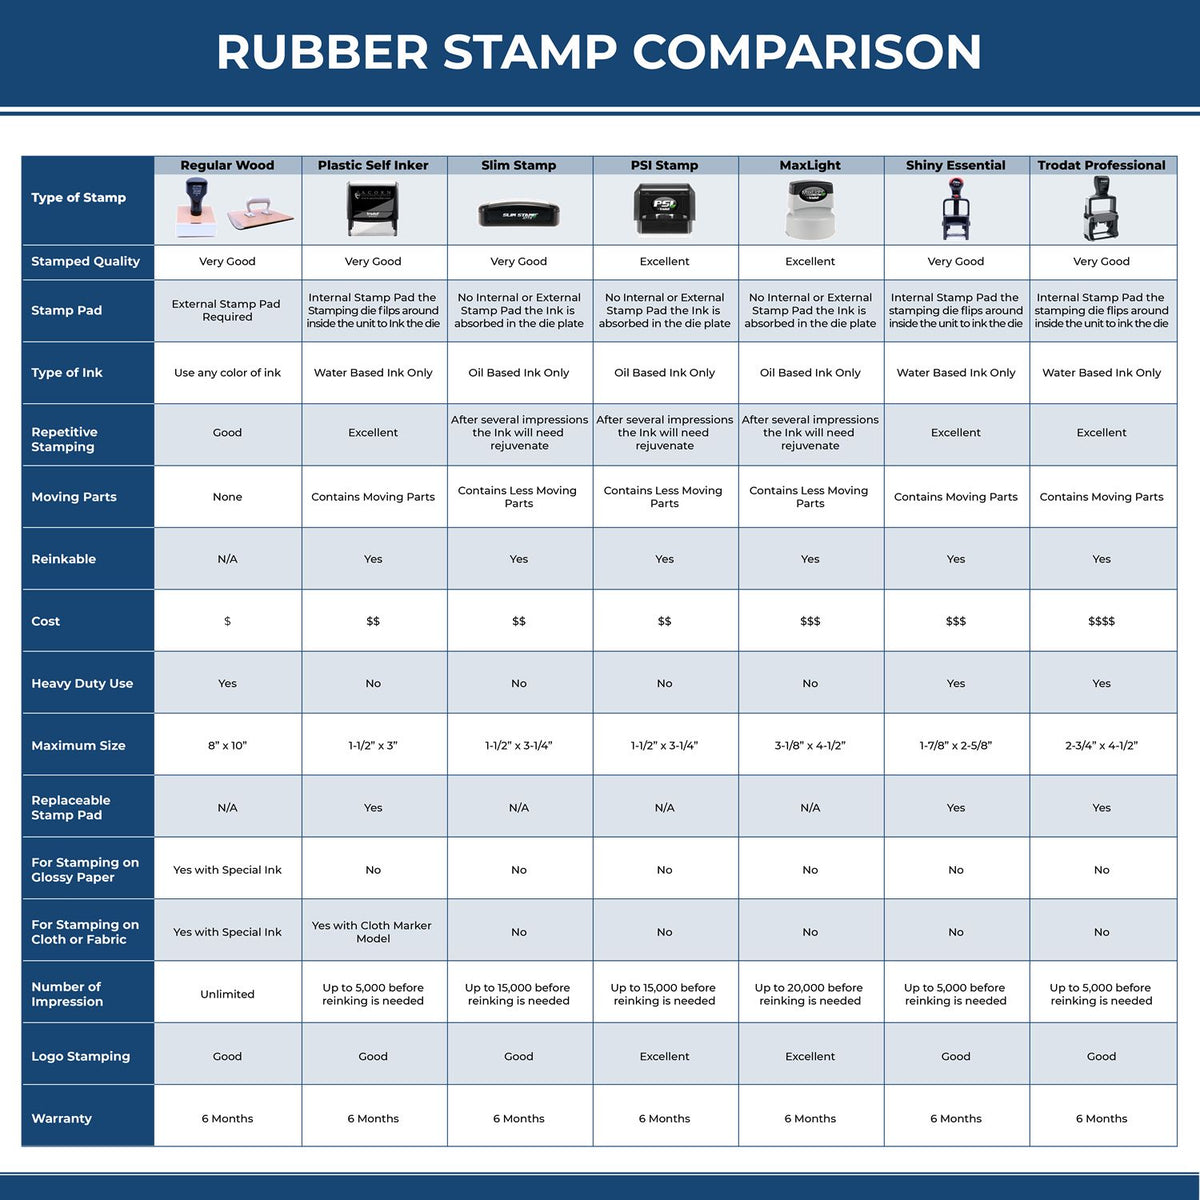 A comparison chart for the different types of mount models available for the Slim Pre-Inked Rectangular Notary Stamp for Illinois.